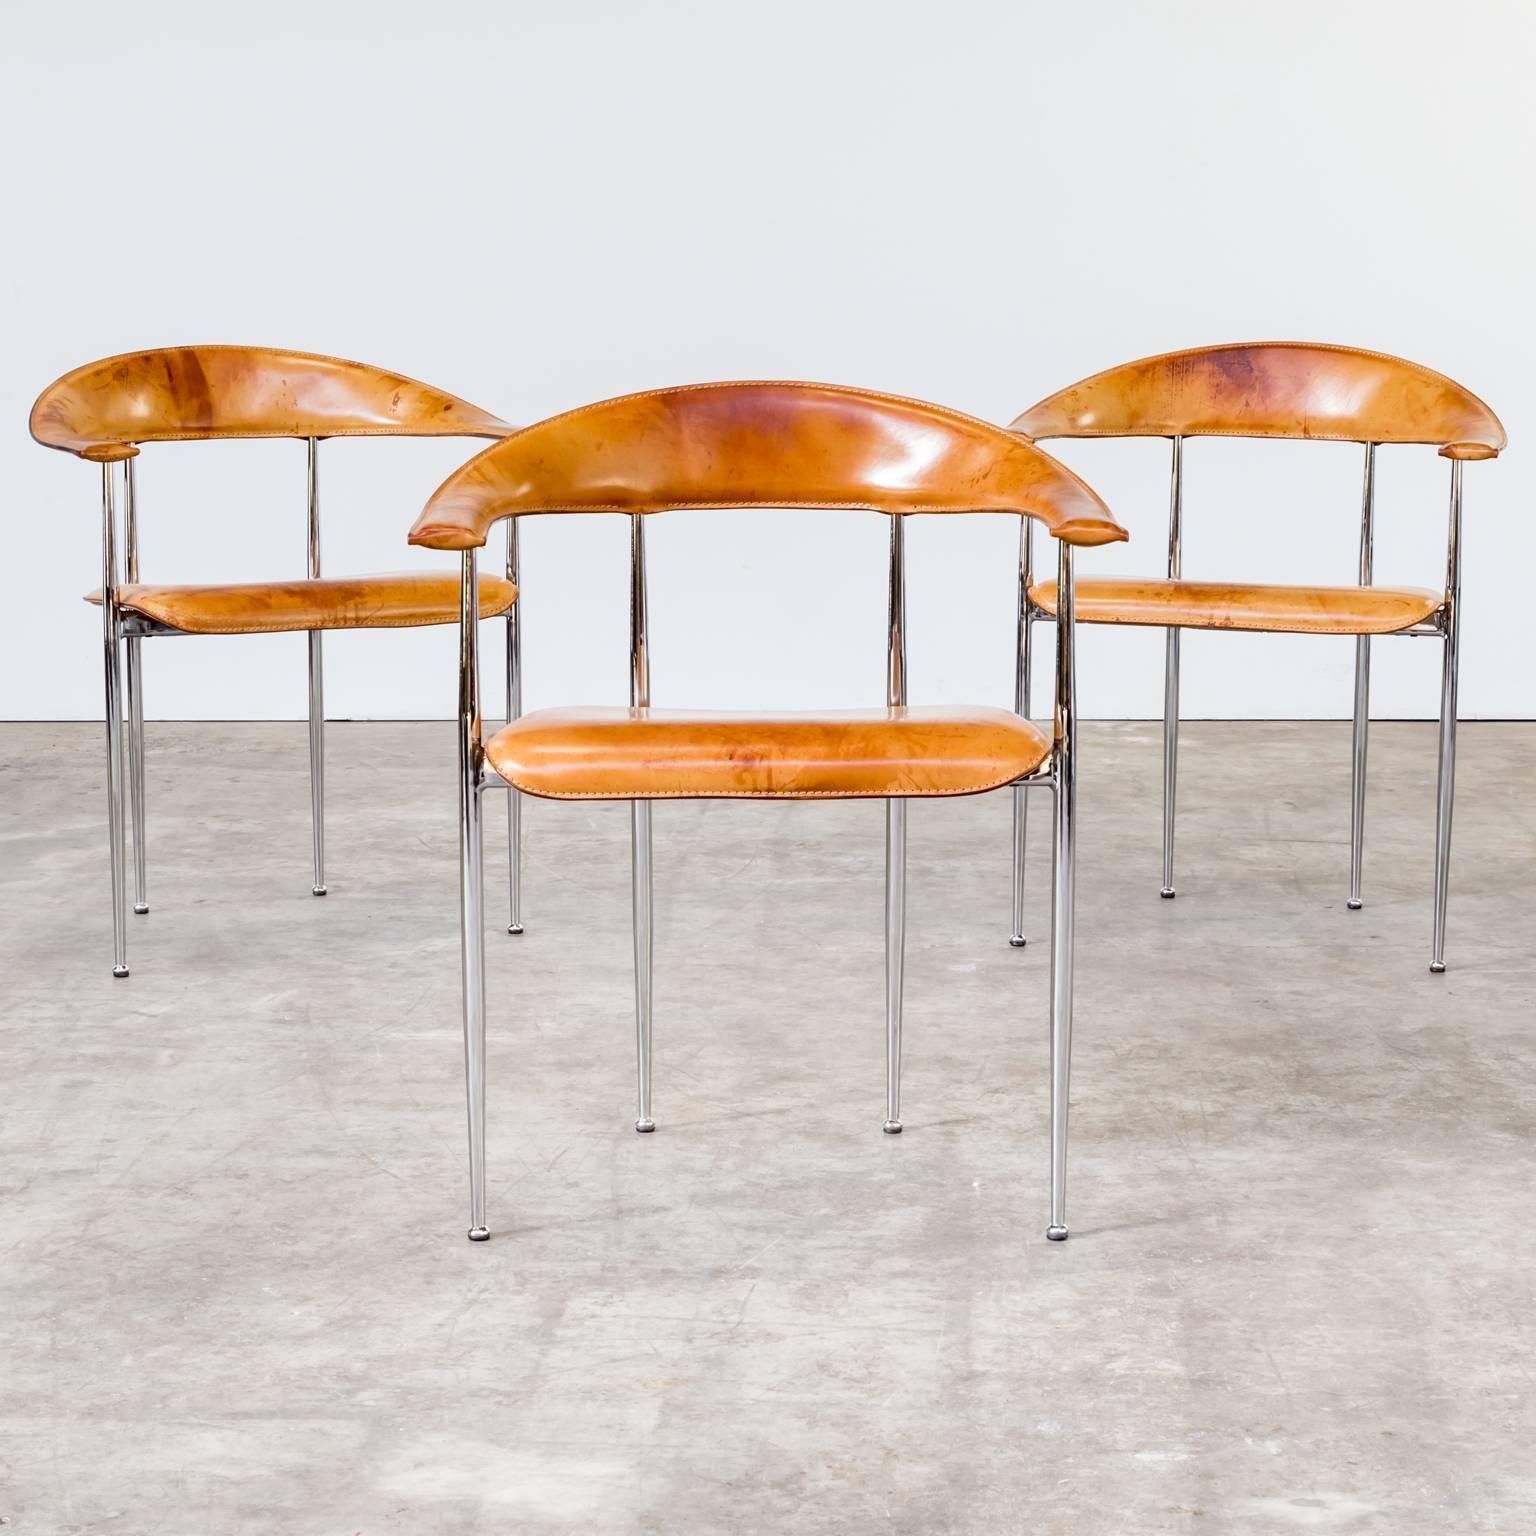 One set of three 1980s G. Vegni & G. Gualtierotti chair for Fasem, Italy. Beautiful shaped chairs and patina on this set of chairs model P/40. Chromed tubular steel base. Seat and top rail upholstered in cognac leather.